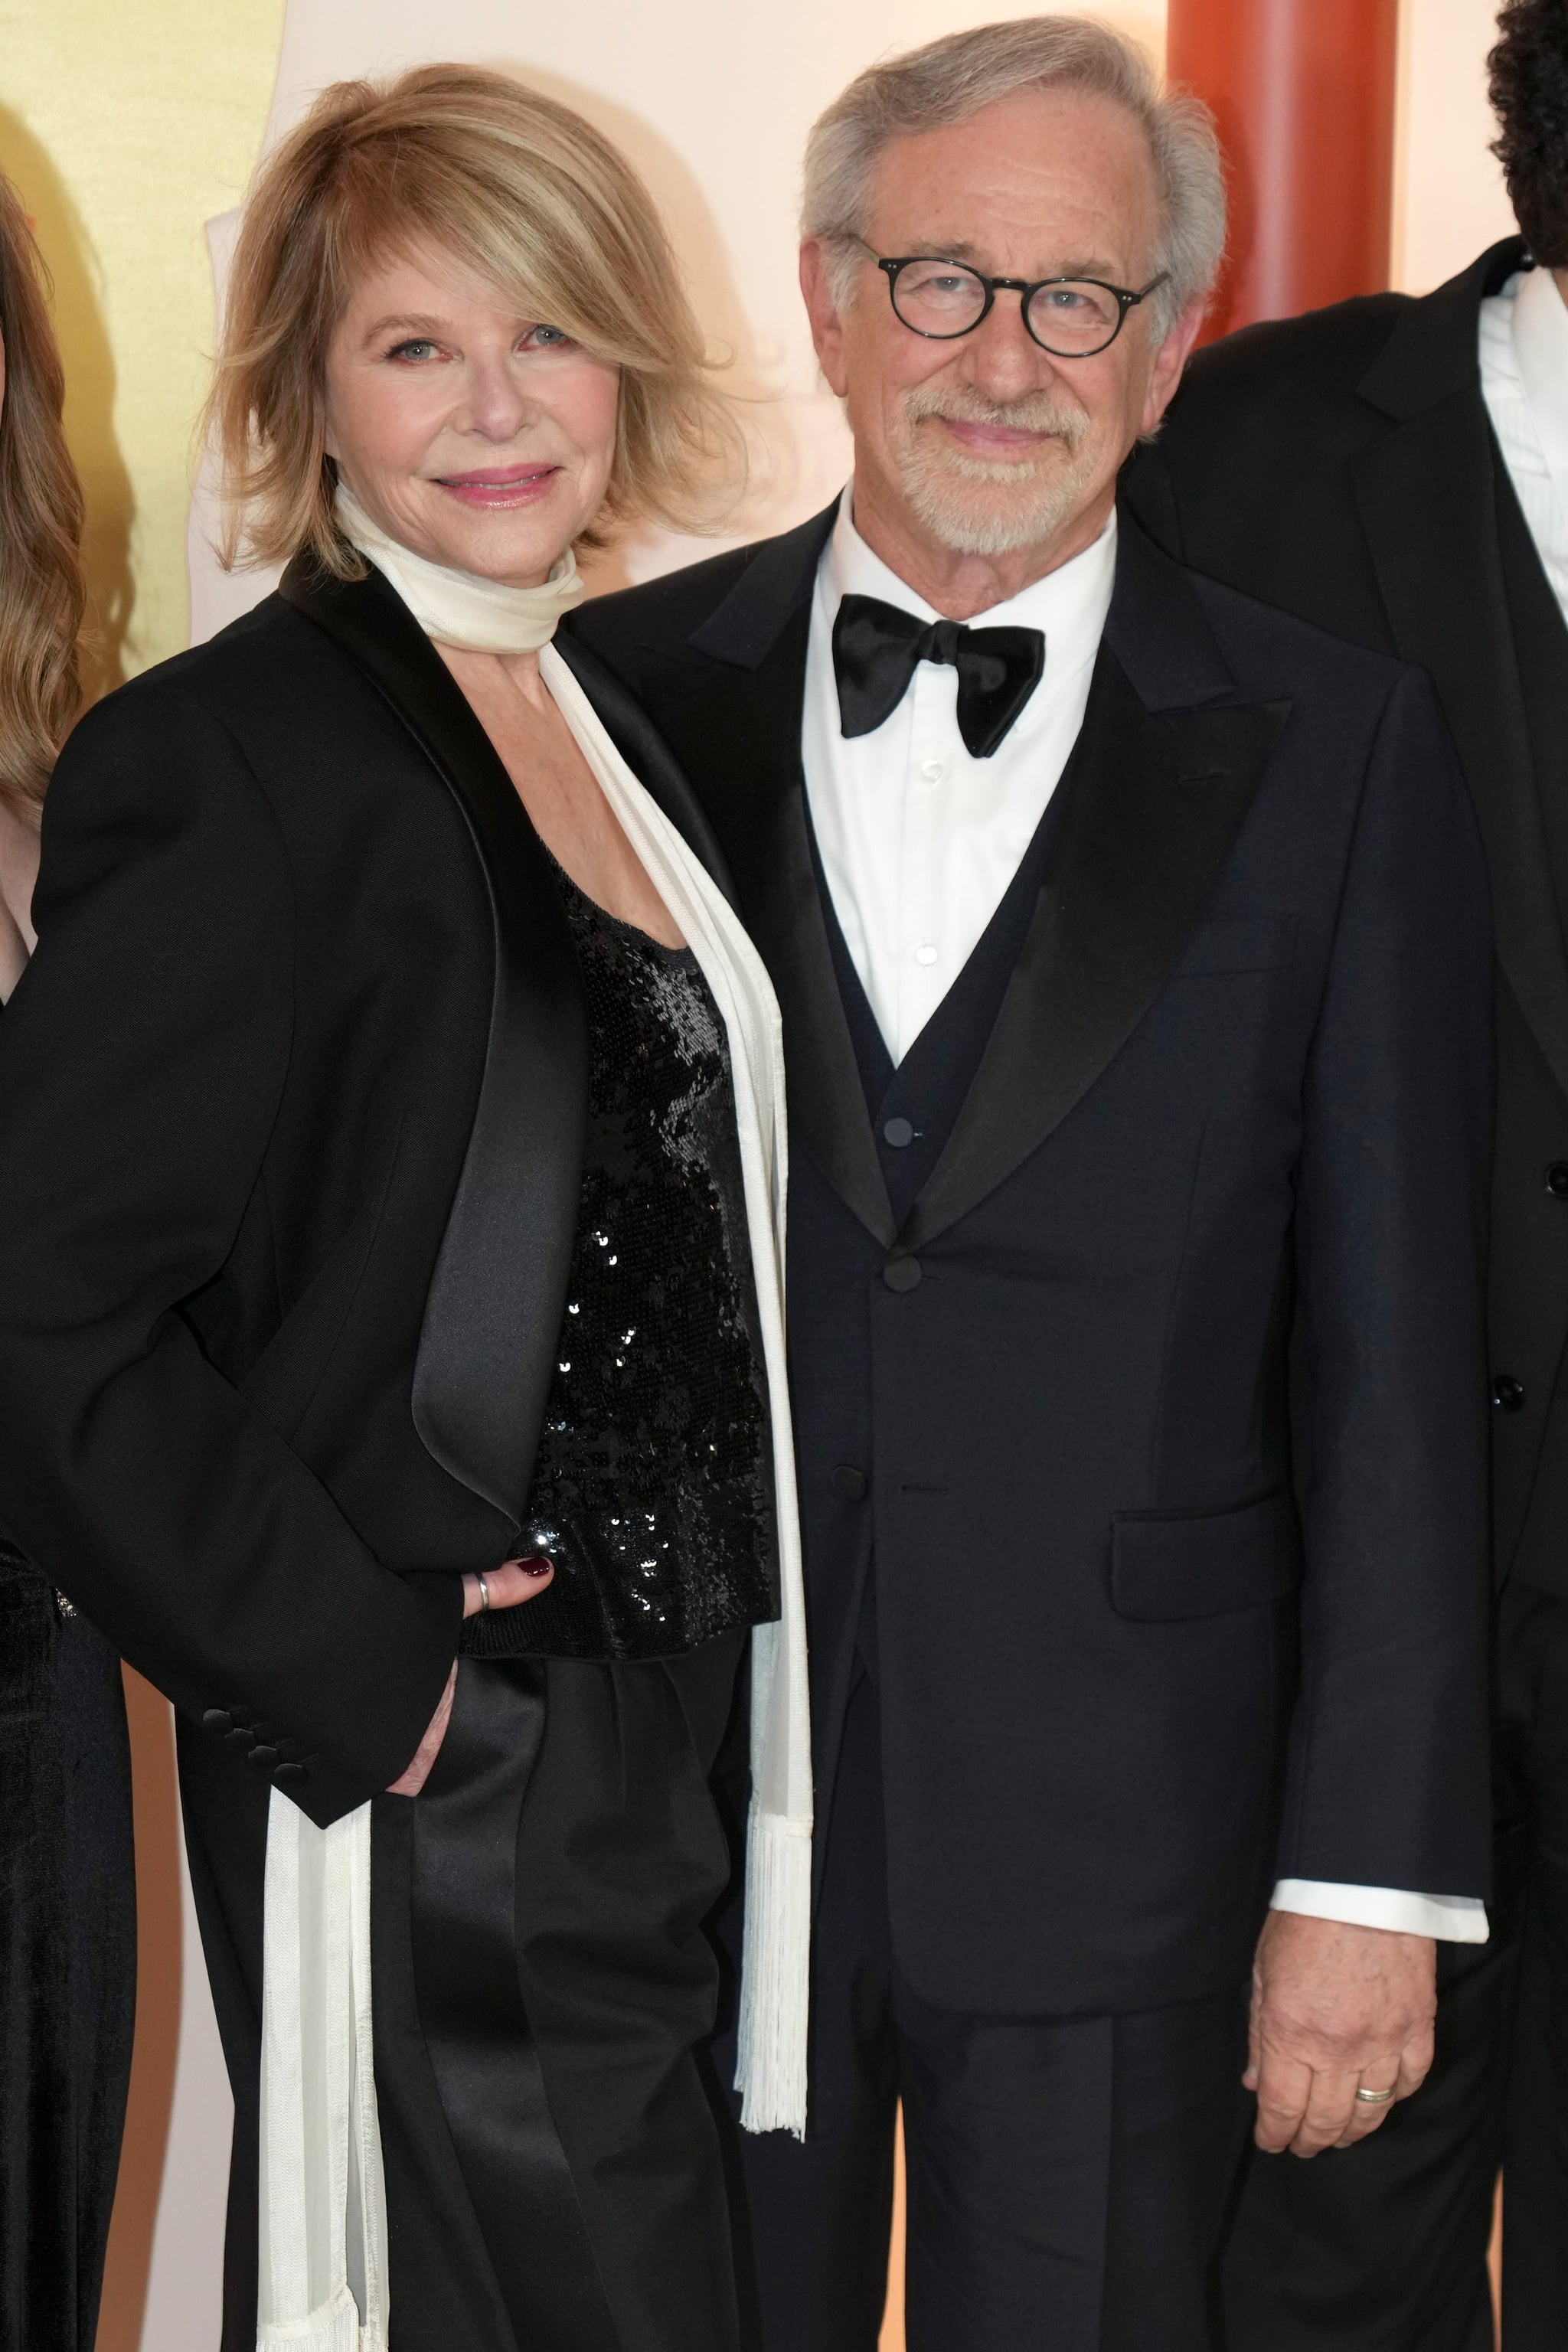 Græder R unlock Kate Capshaw and Steven Spielberg at the 2023 Oscars | All the Stunning  Celebrity Couples at the 2023 Oscars | POPSUGAR Celebrity Photo 25